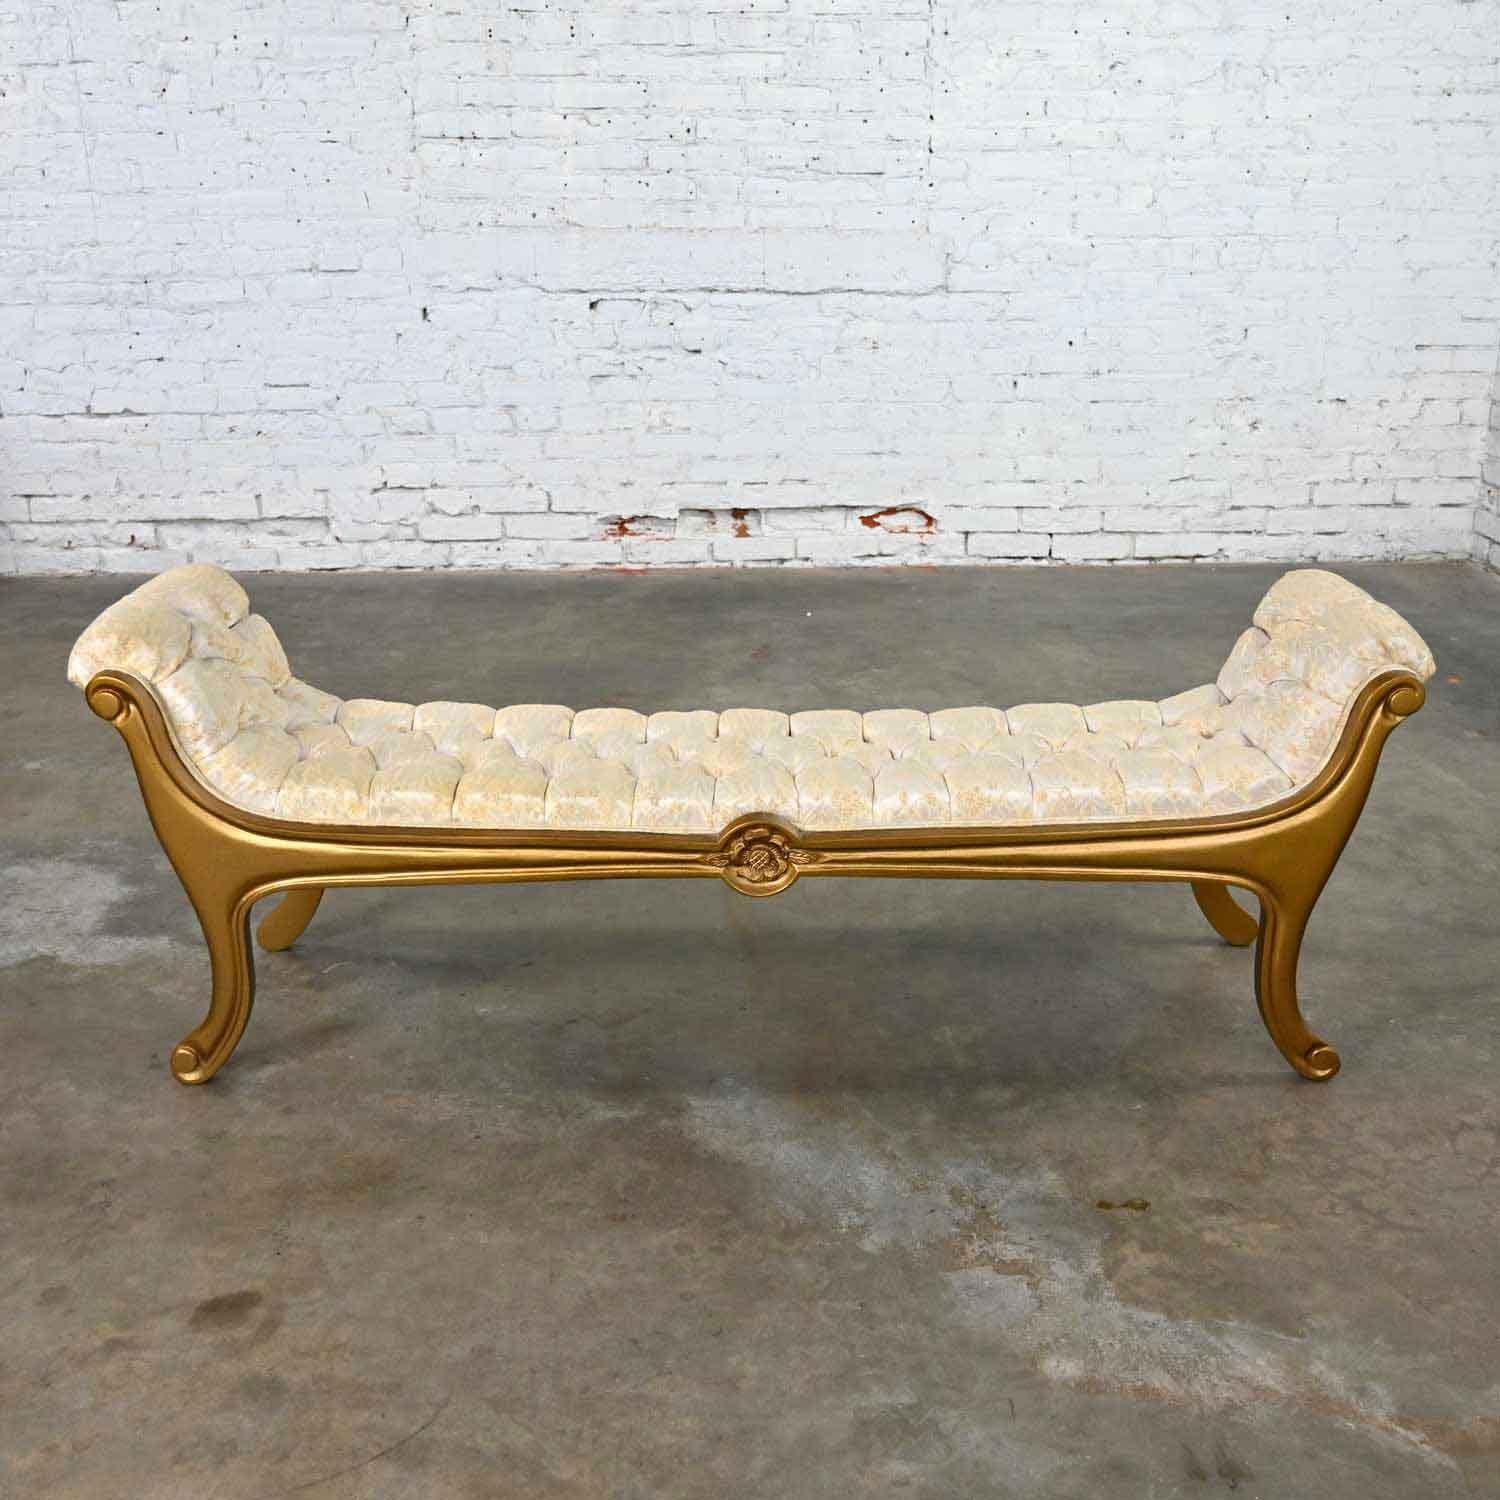 Phenomenal Hollywood Regency or French Provincial upholstered gilded gondola bench attributed to Prince Howard Furniture. Original beige and golden brocade fabric and giltwood finish. Beautiful condition, keeping in mind that this is vintage and not